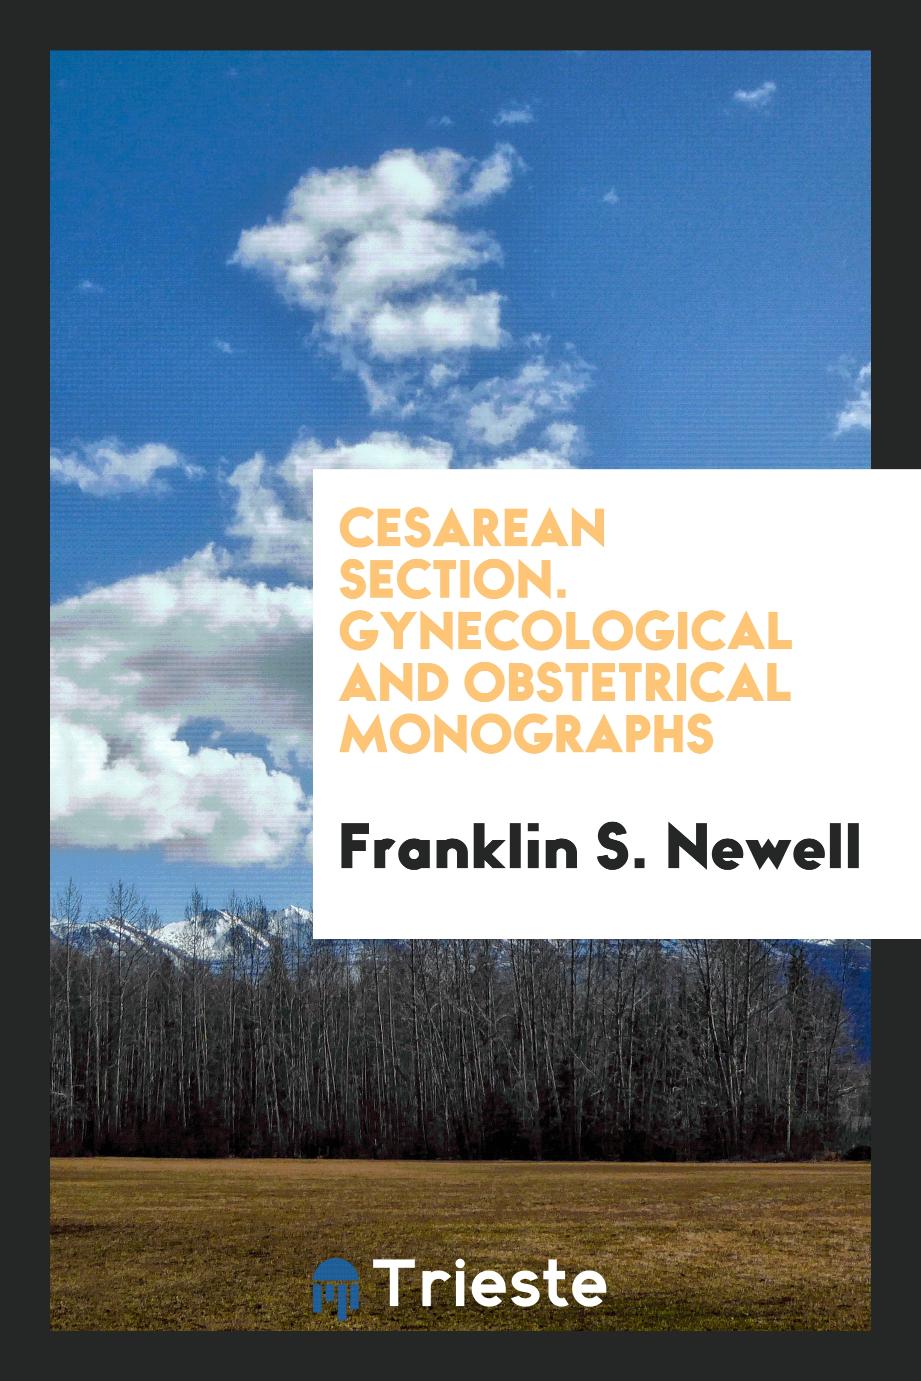 Cesarean Section. Gynecological and obstetrical monographs